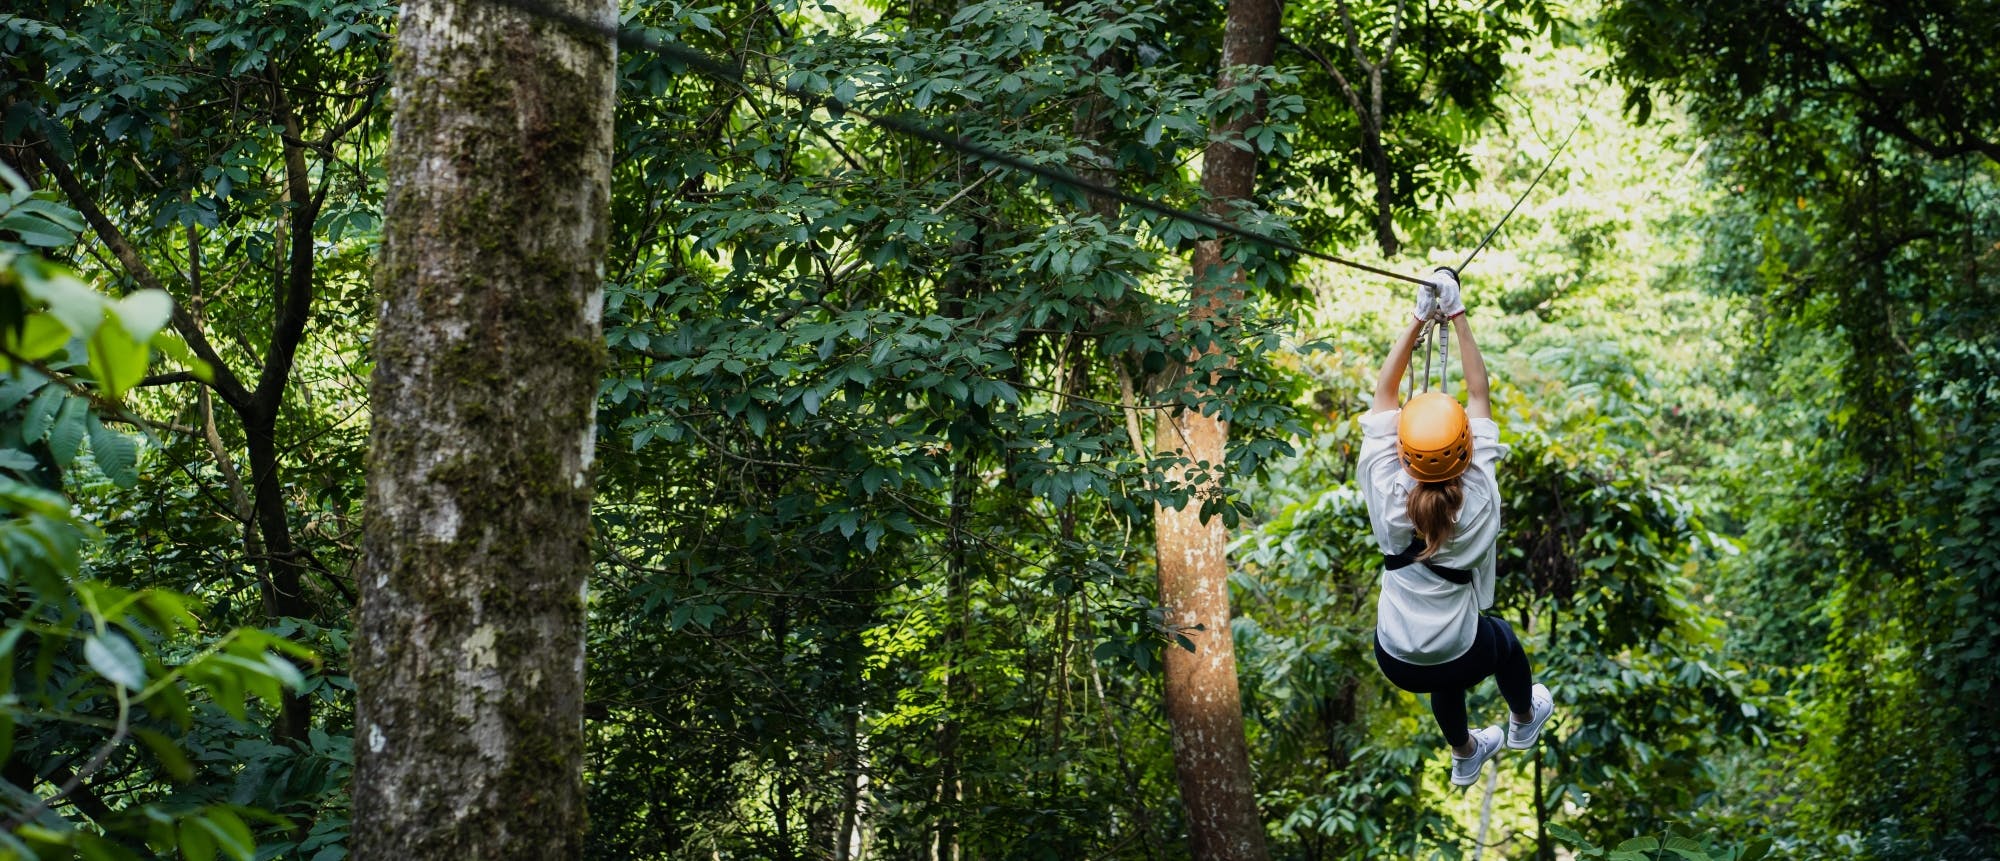 Extreme zipline experience in Ao Nang adventure park Musement